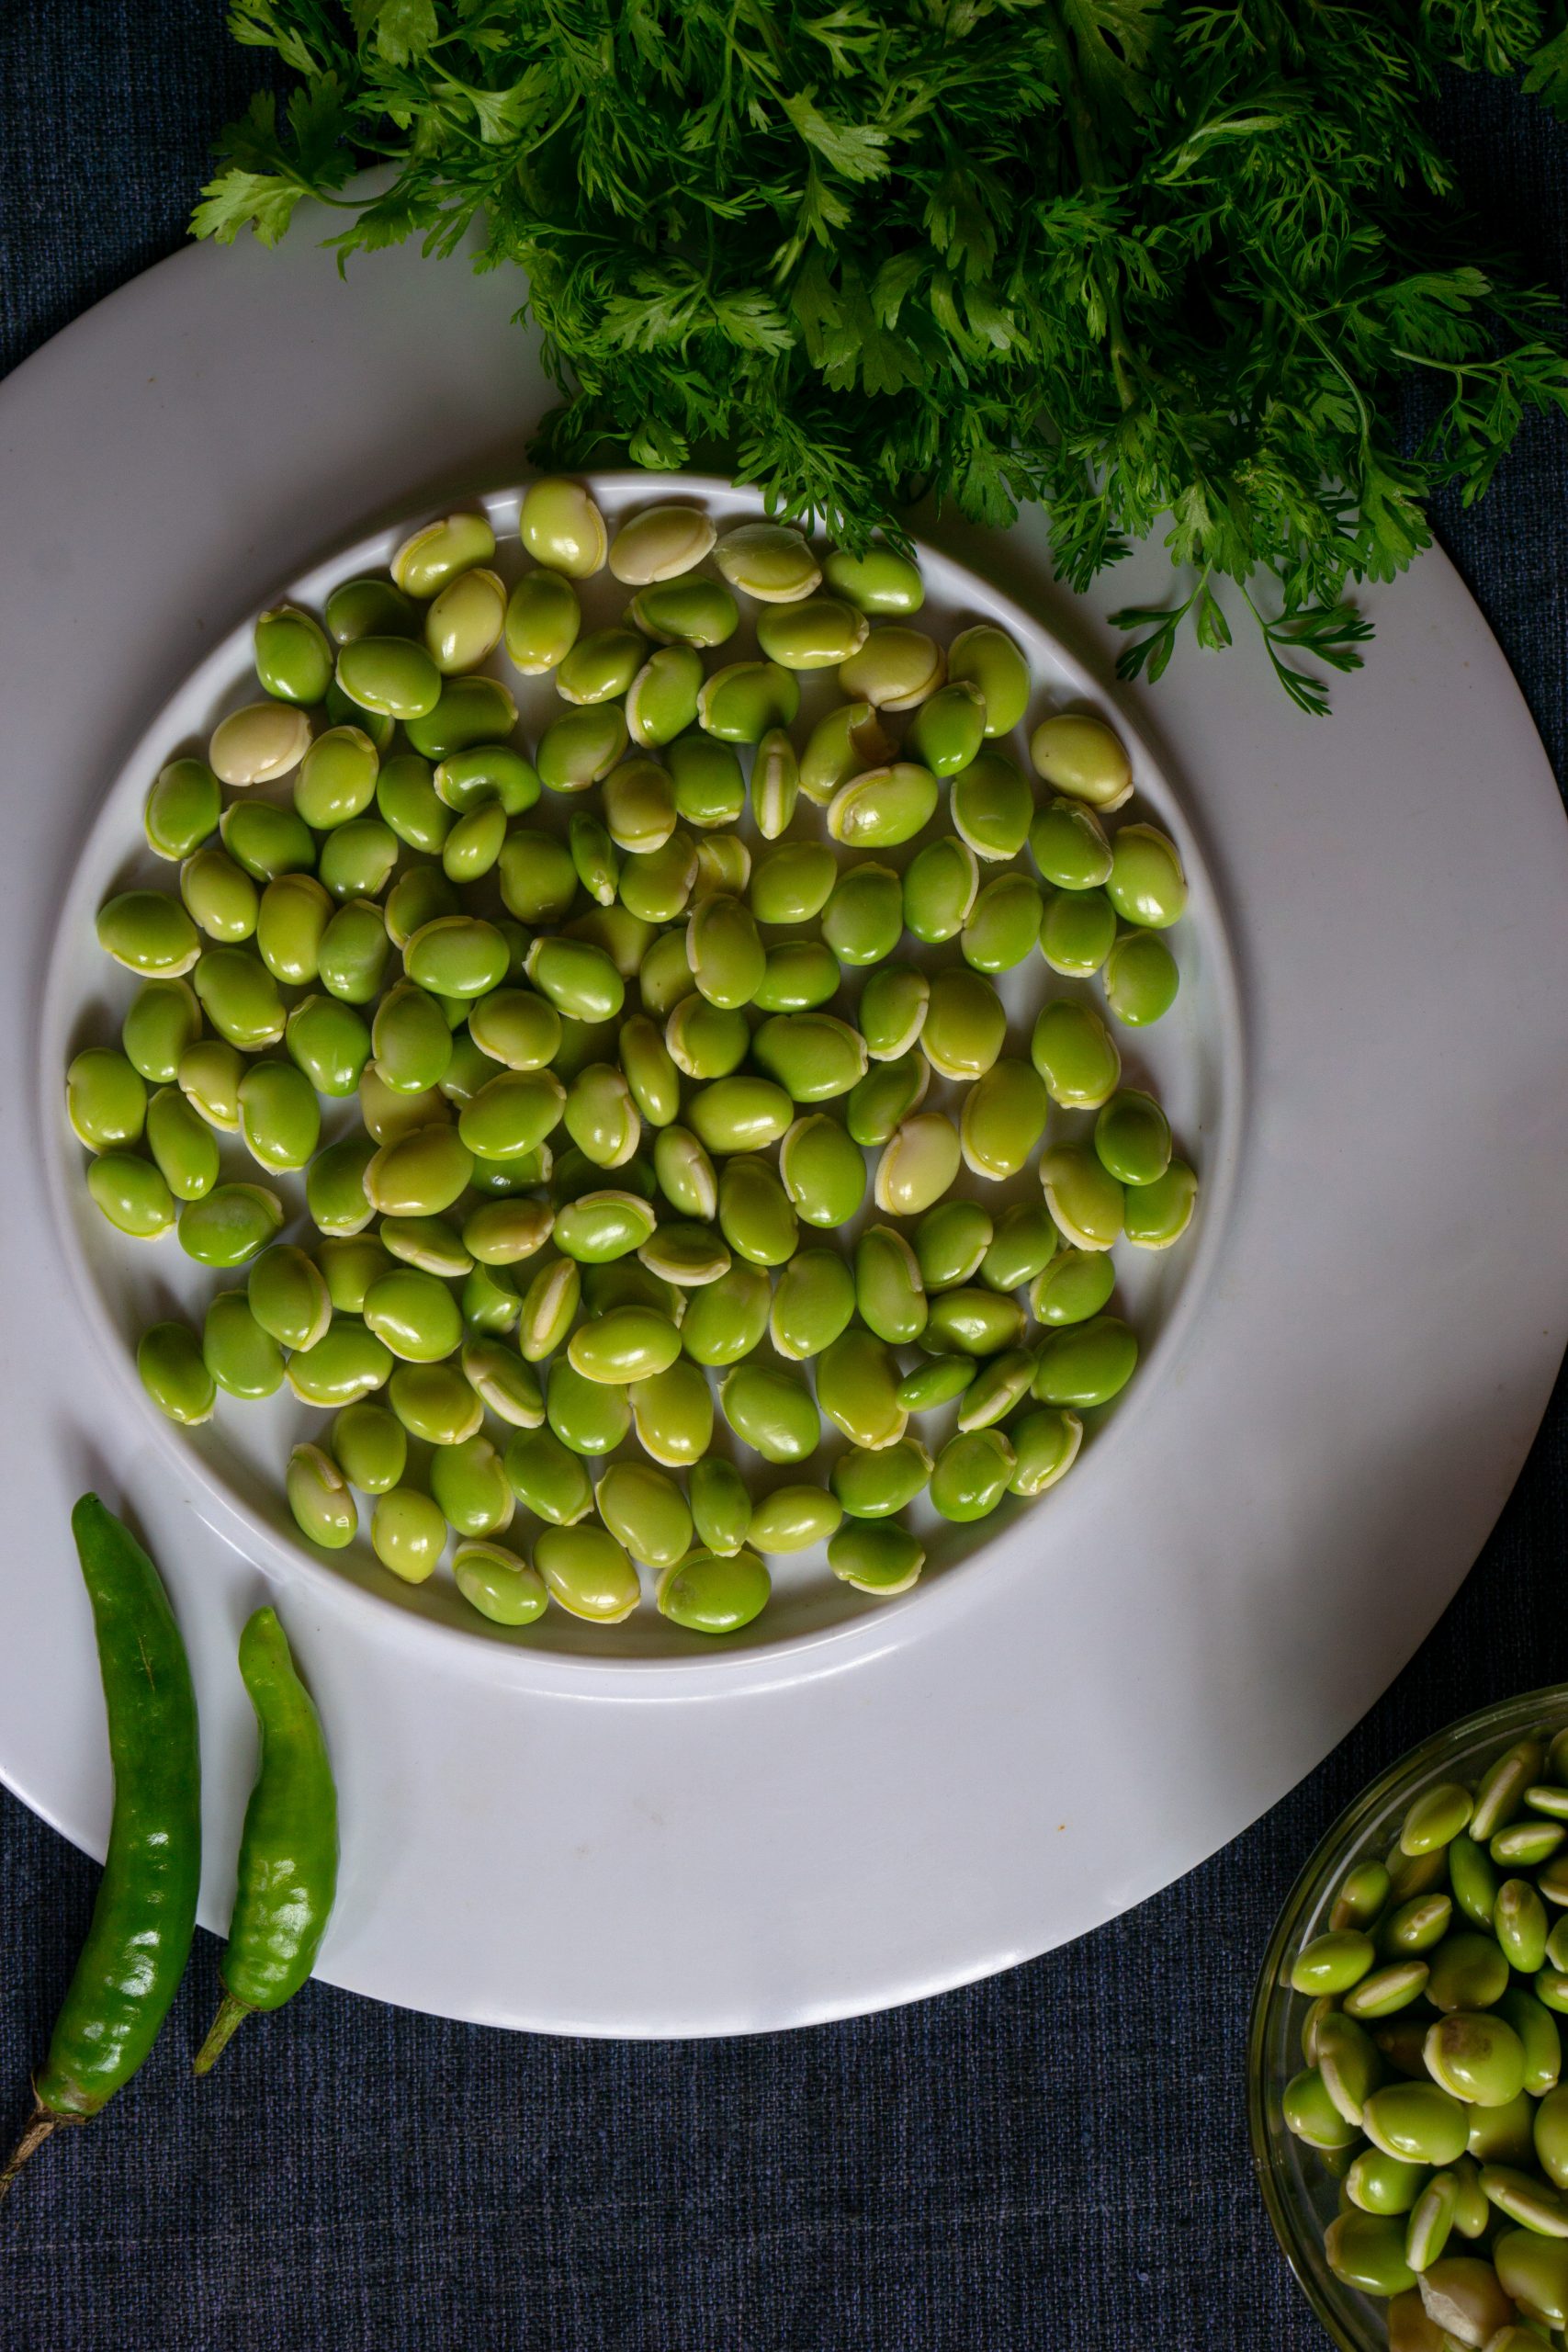 Fresh green lima beans in a plate